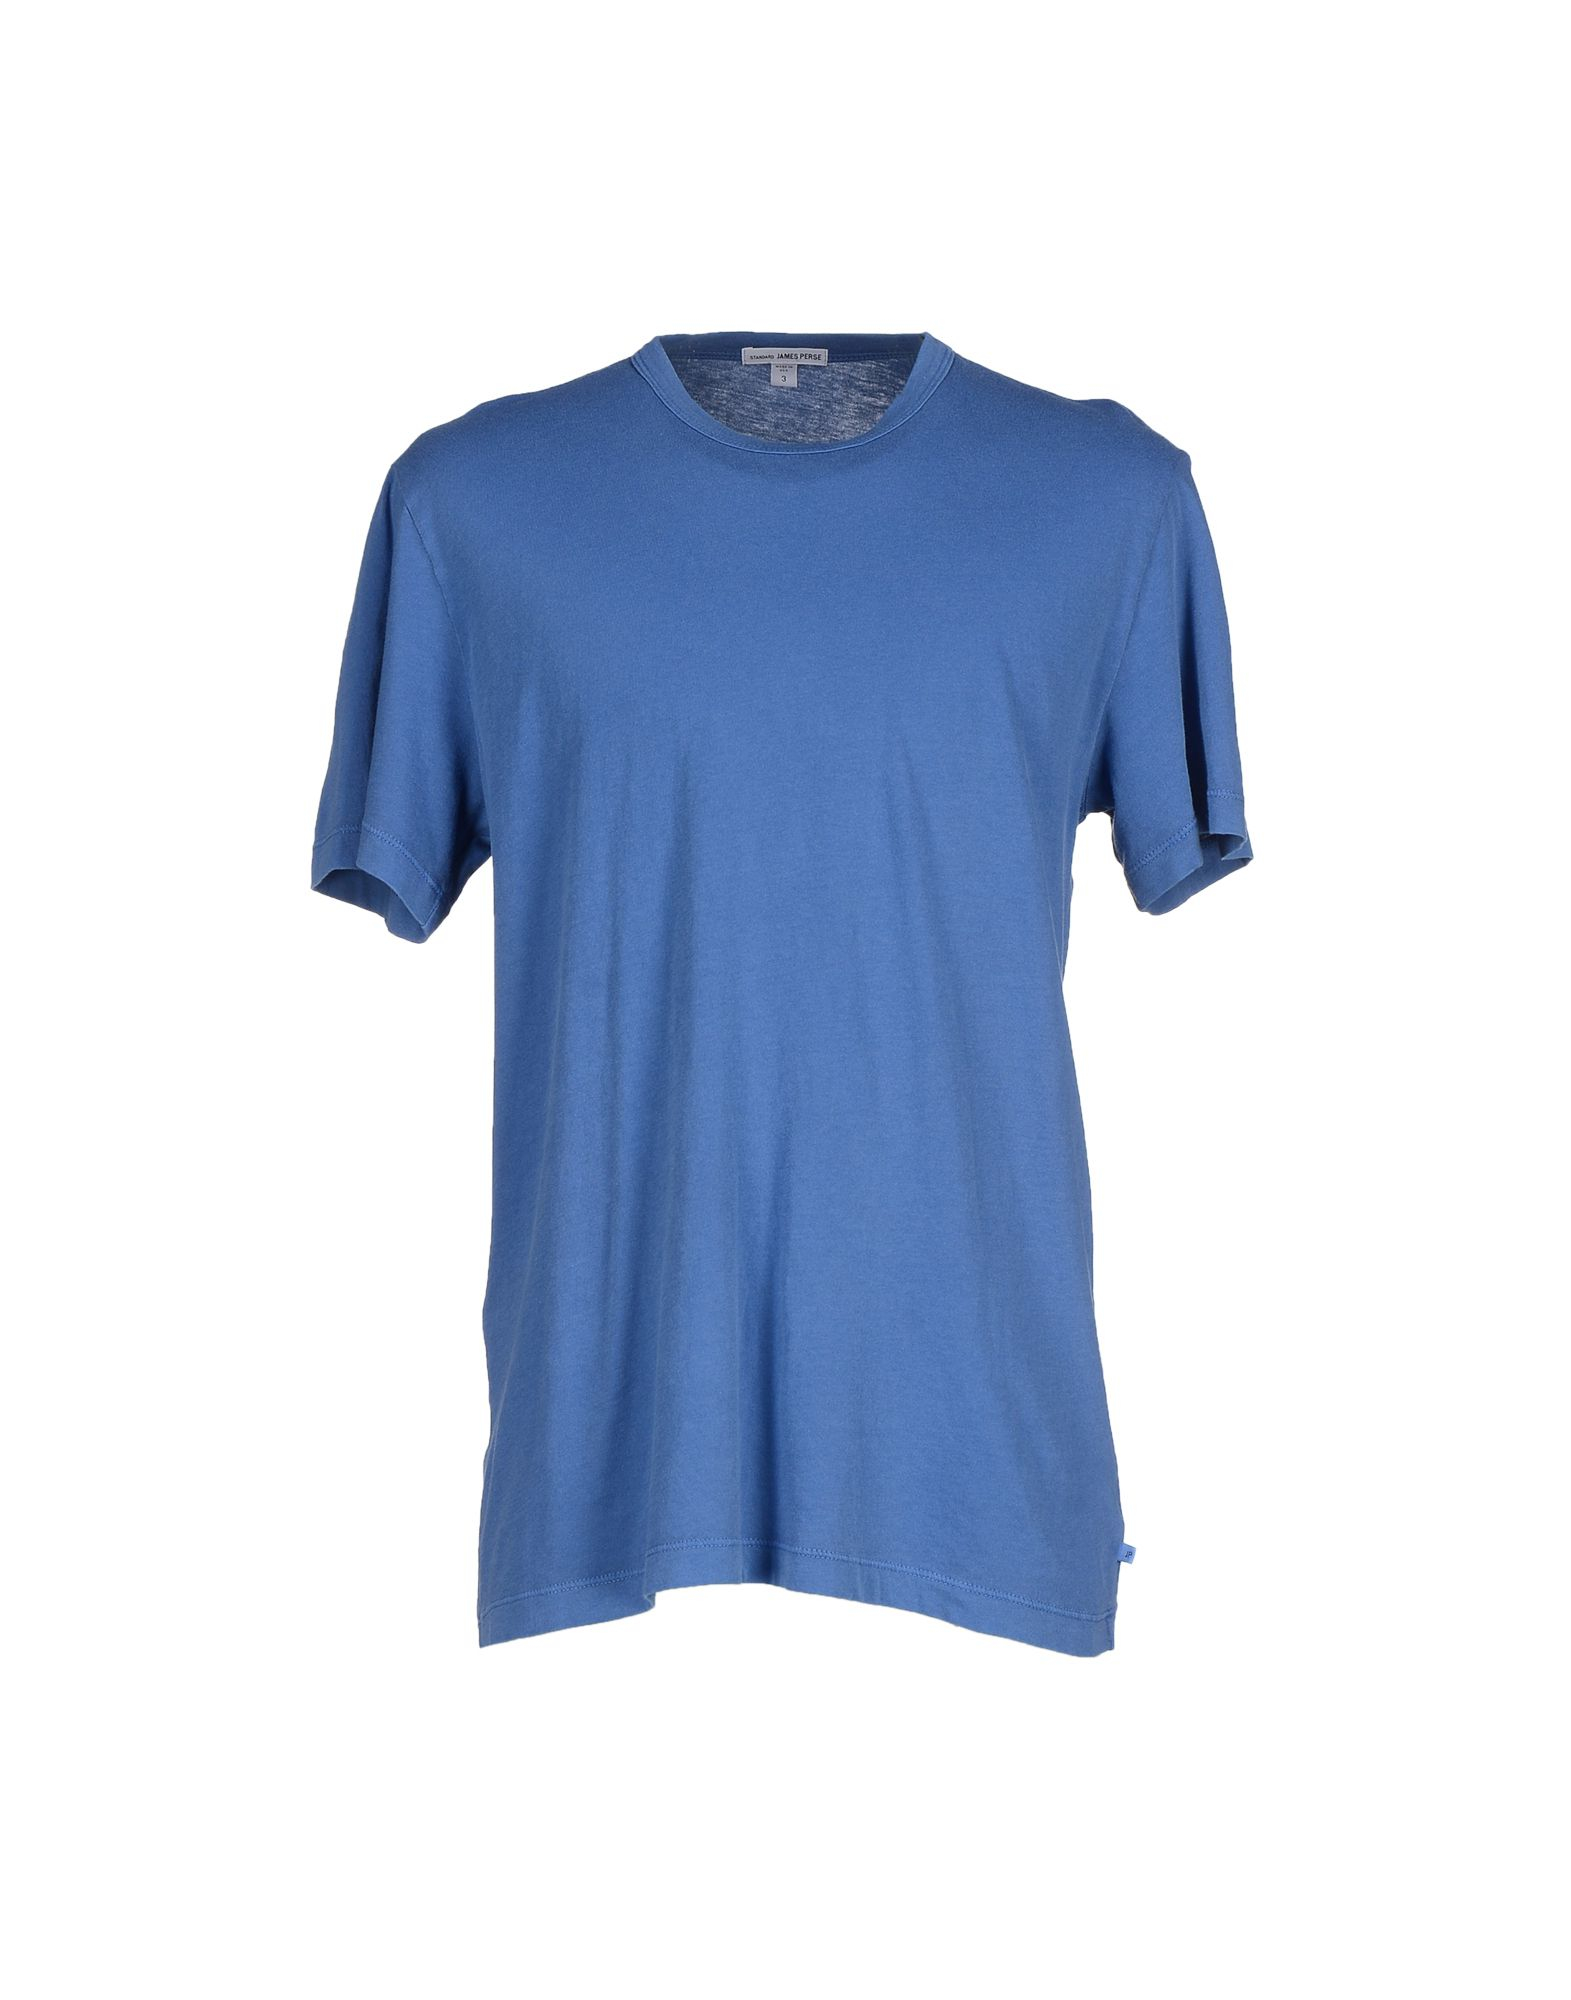 James perse T-shirt in Blue for Men (Pastel blue) | Lyst